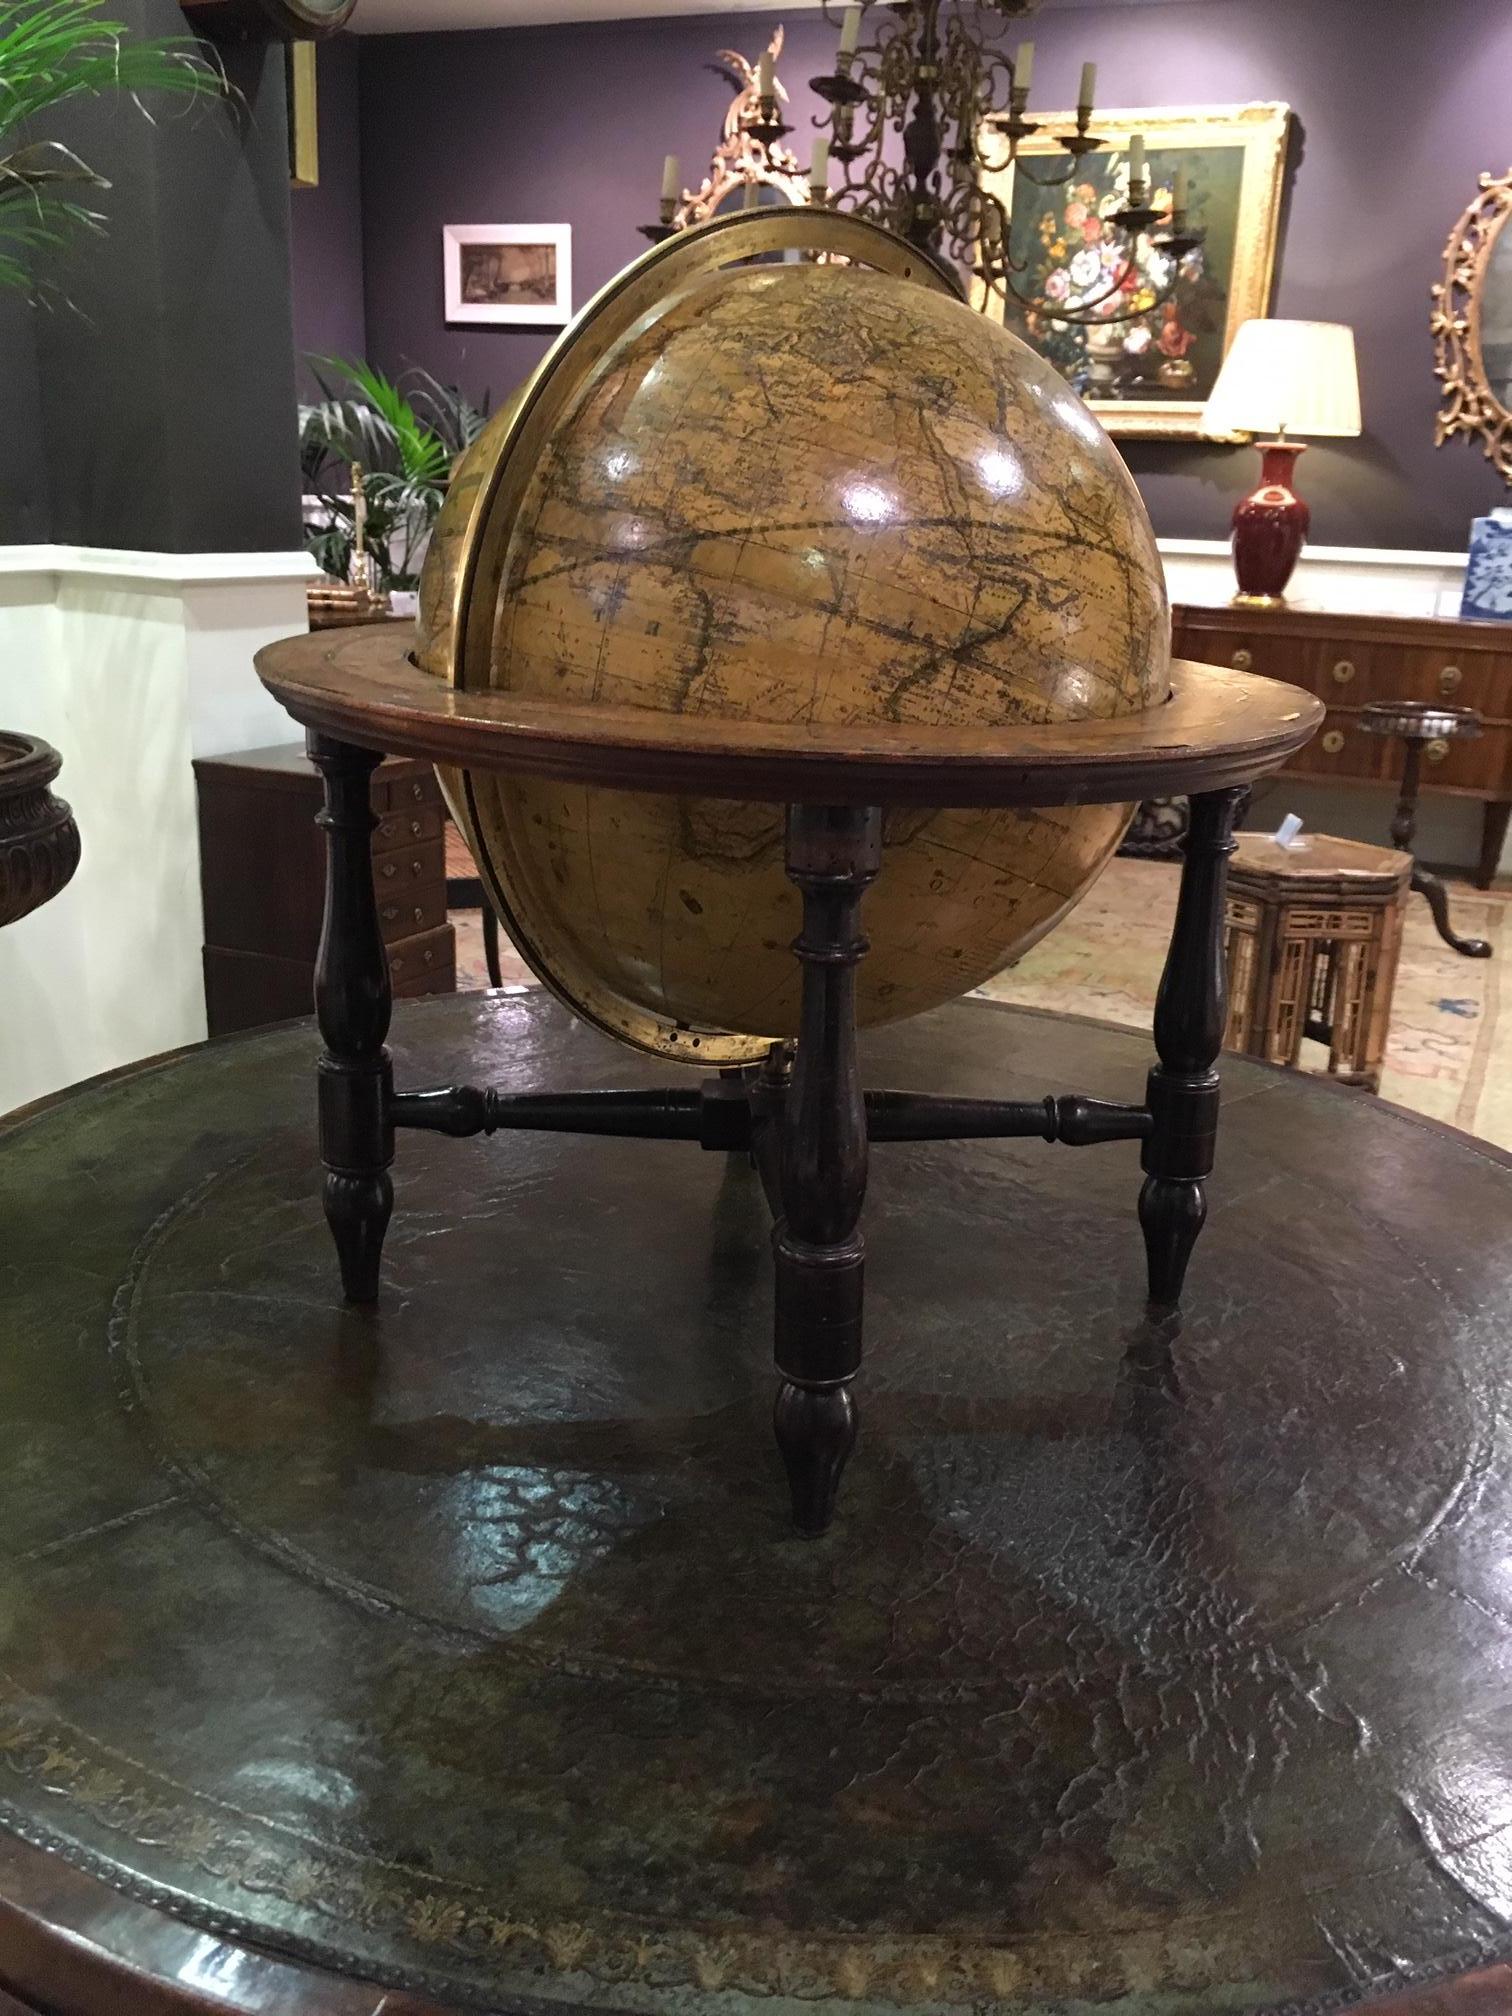 Terrestrial table globe by Donald & Sons, Niddry St Edinburgh. Engraved in 1836 by W & A.K. Johnston. The whole is mounted in an ebonized frame and supported on four turned legs united by stretchers. A/f (as found) showing signs of wear and tear on